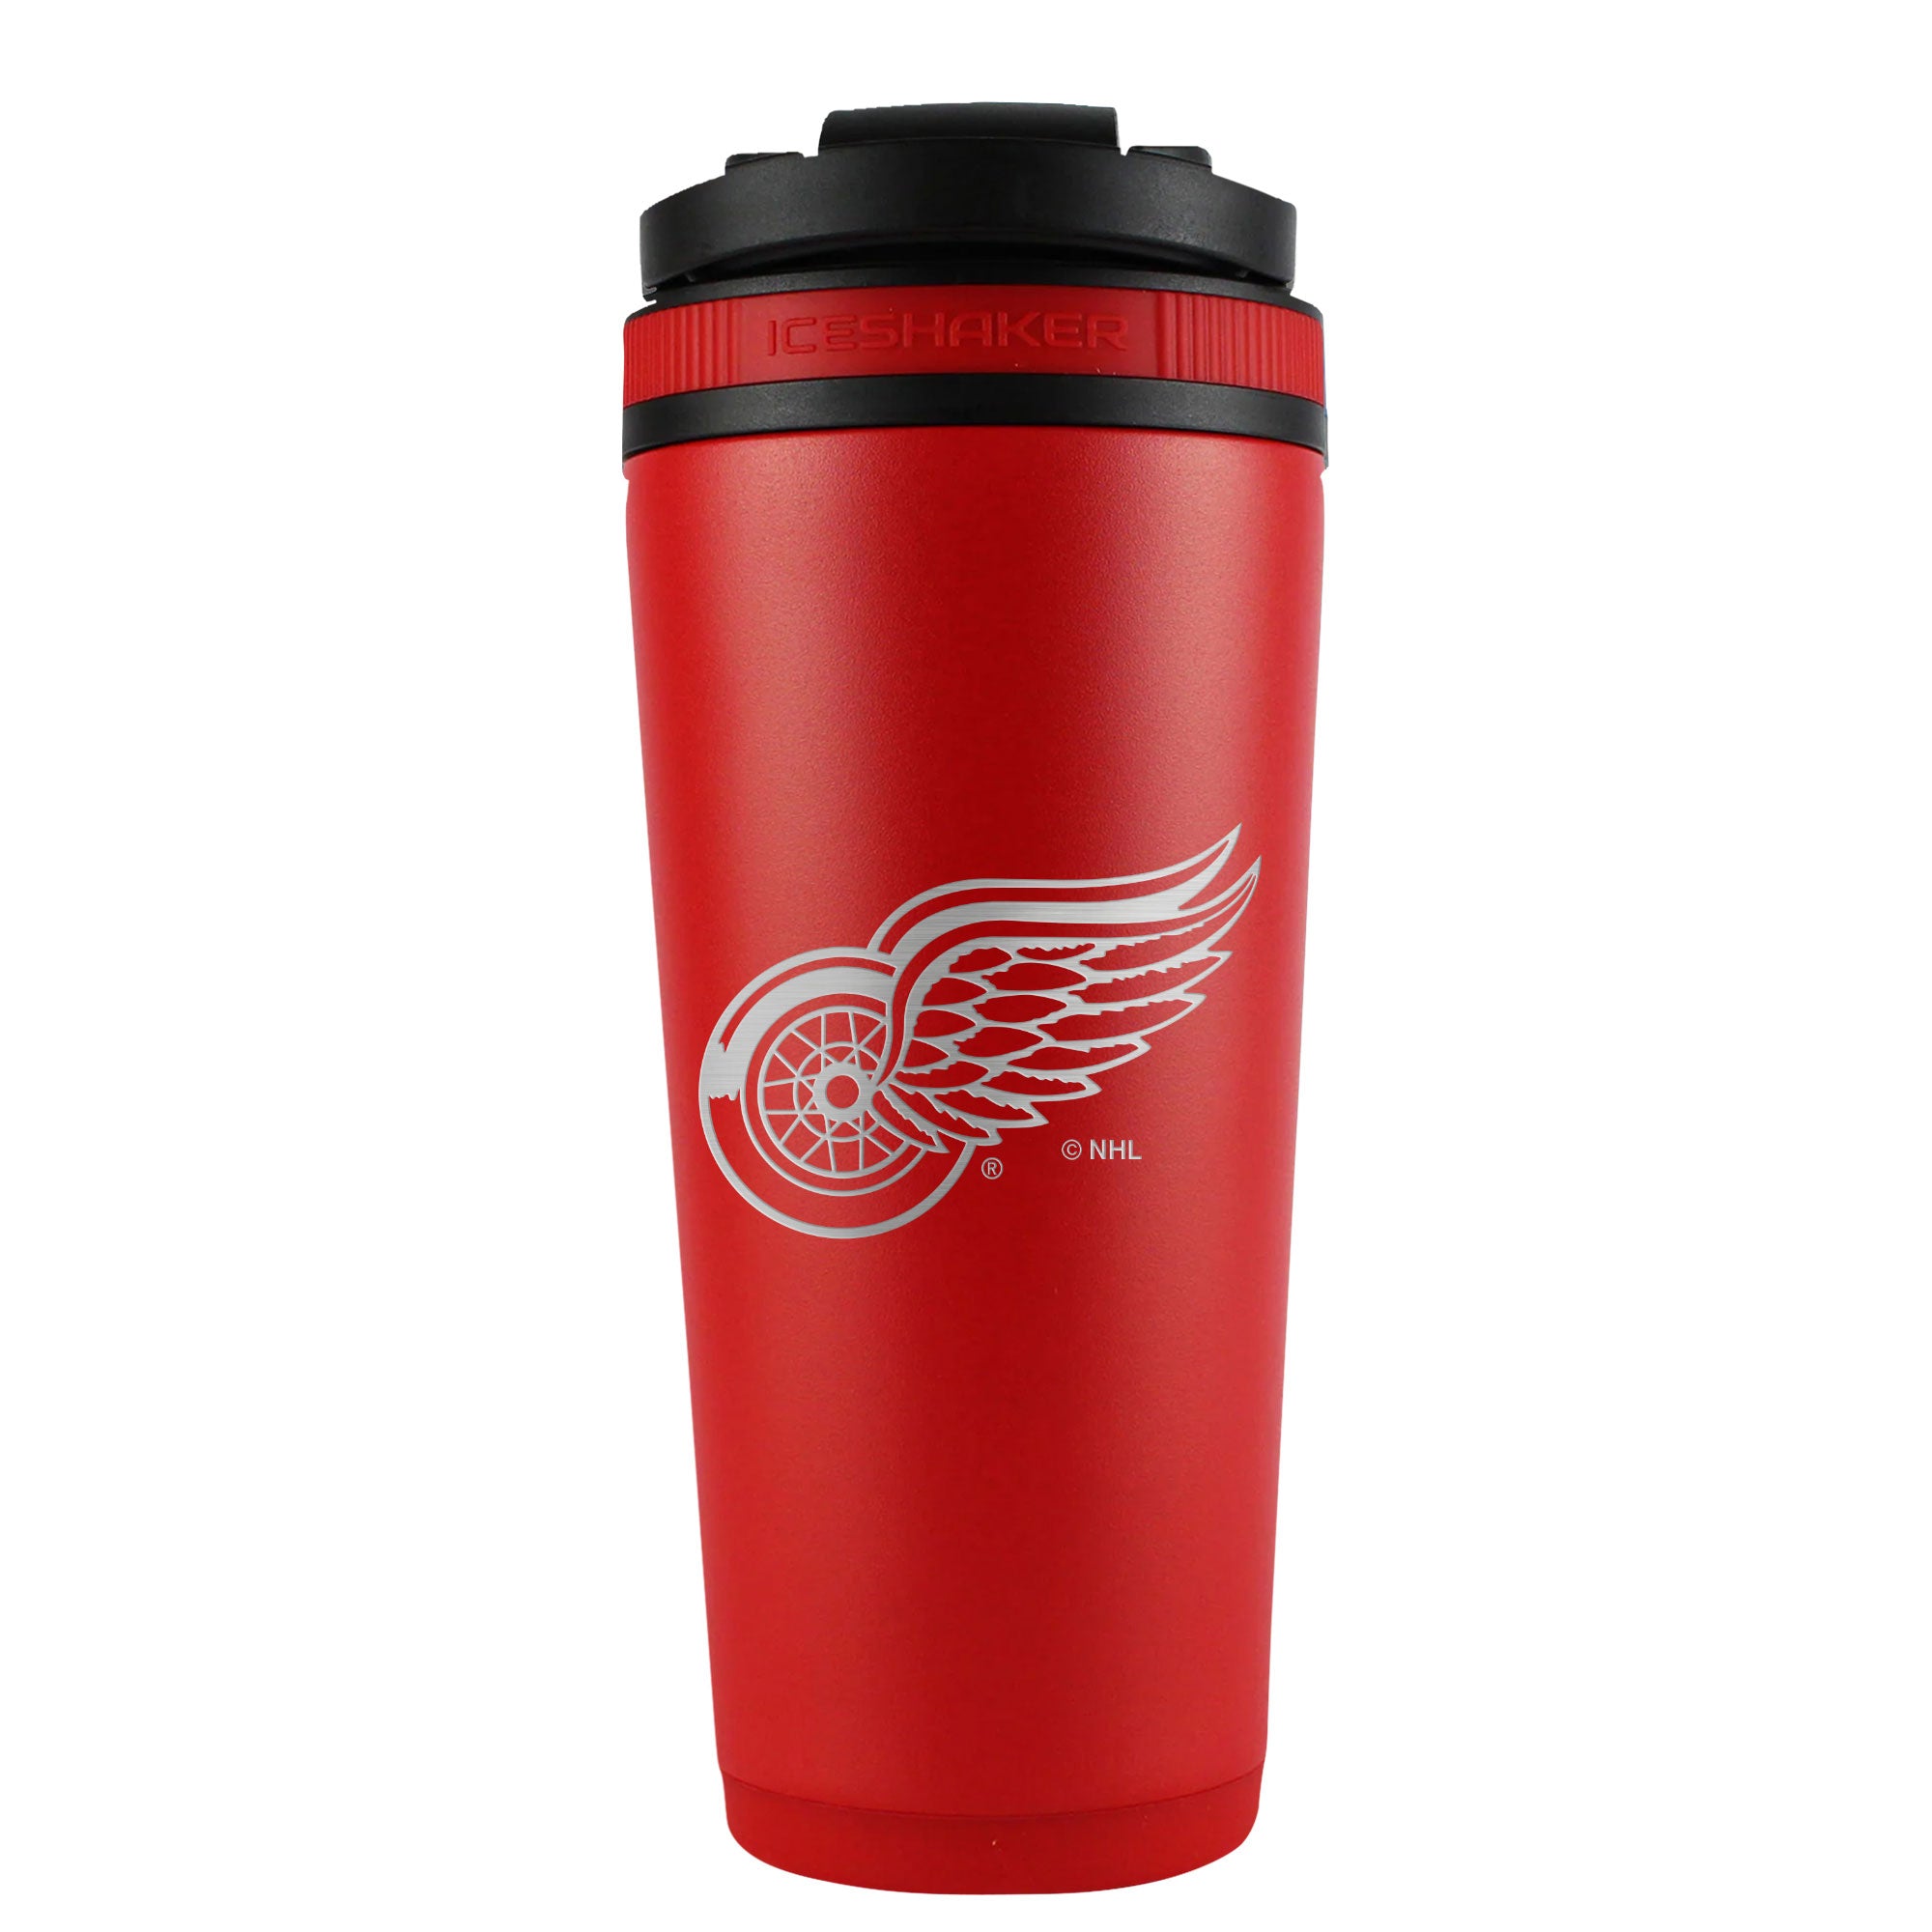 Officially Licensed Detroit Red Wings 26oz Ice Shaker - Red